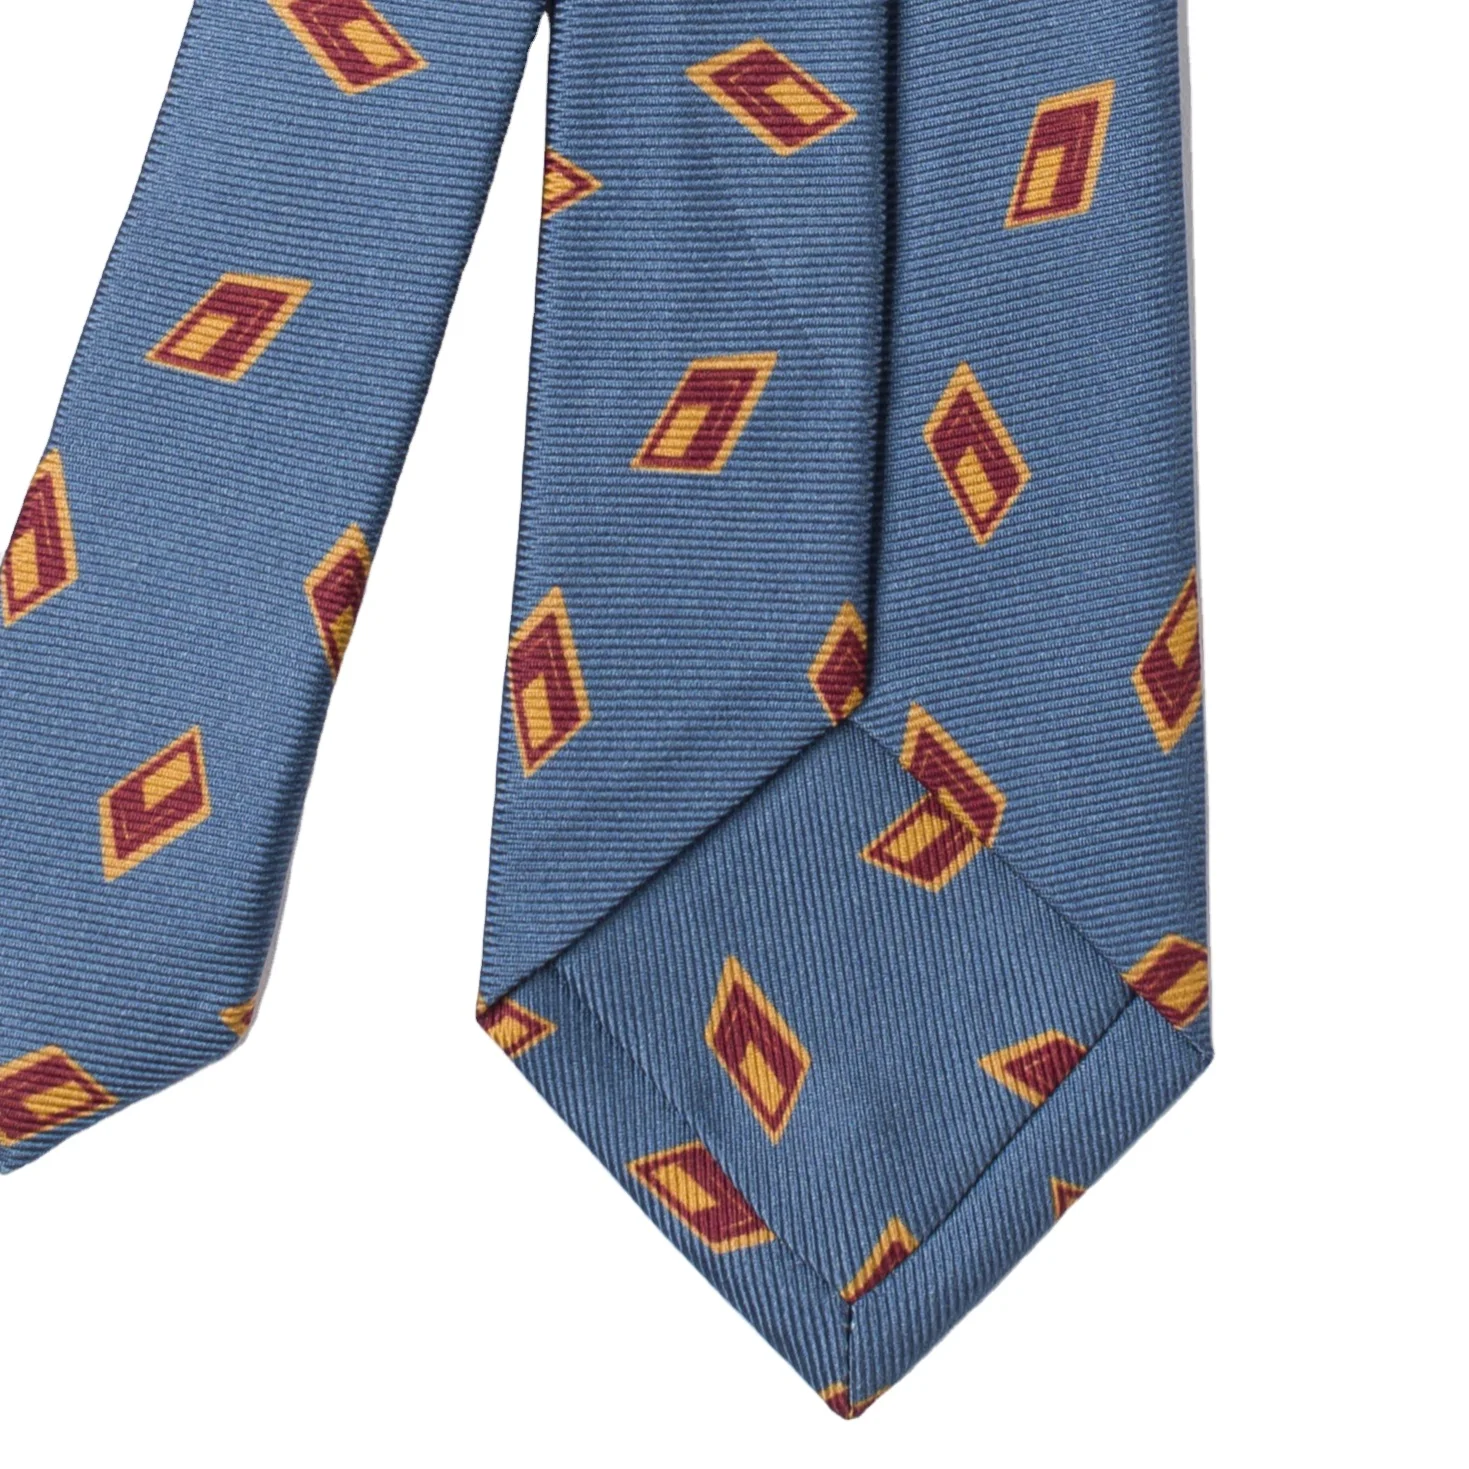 
Sartorial Tie with light blue rectangles patterns 4 pcs pack  (1600237315755)